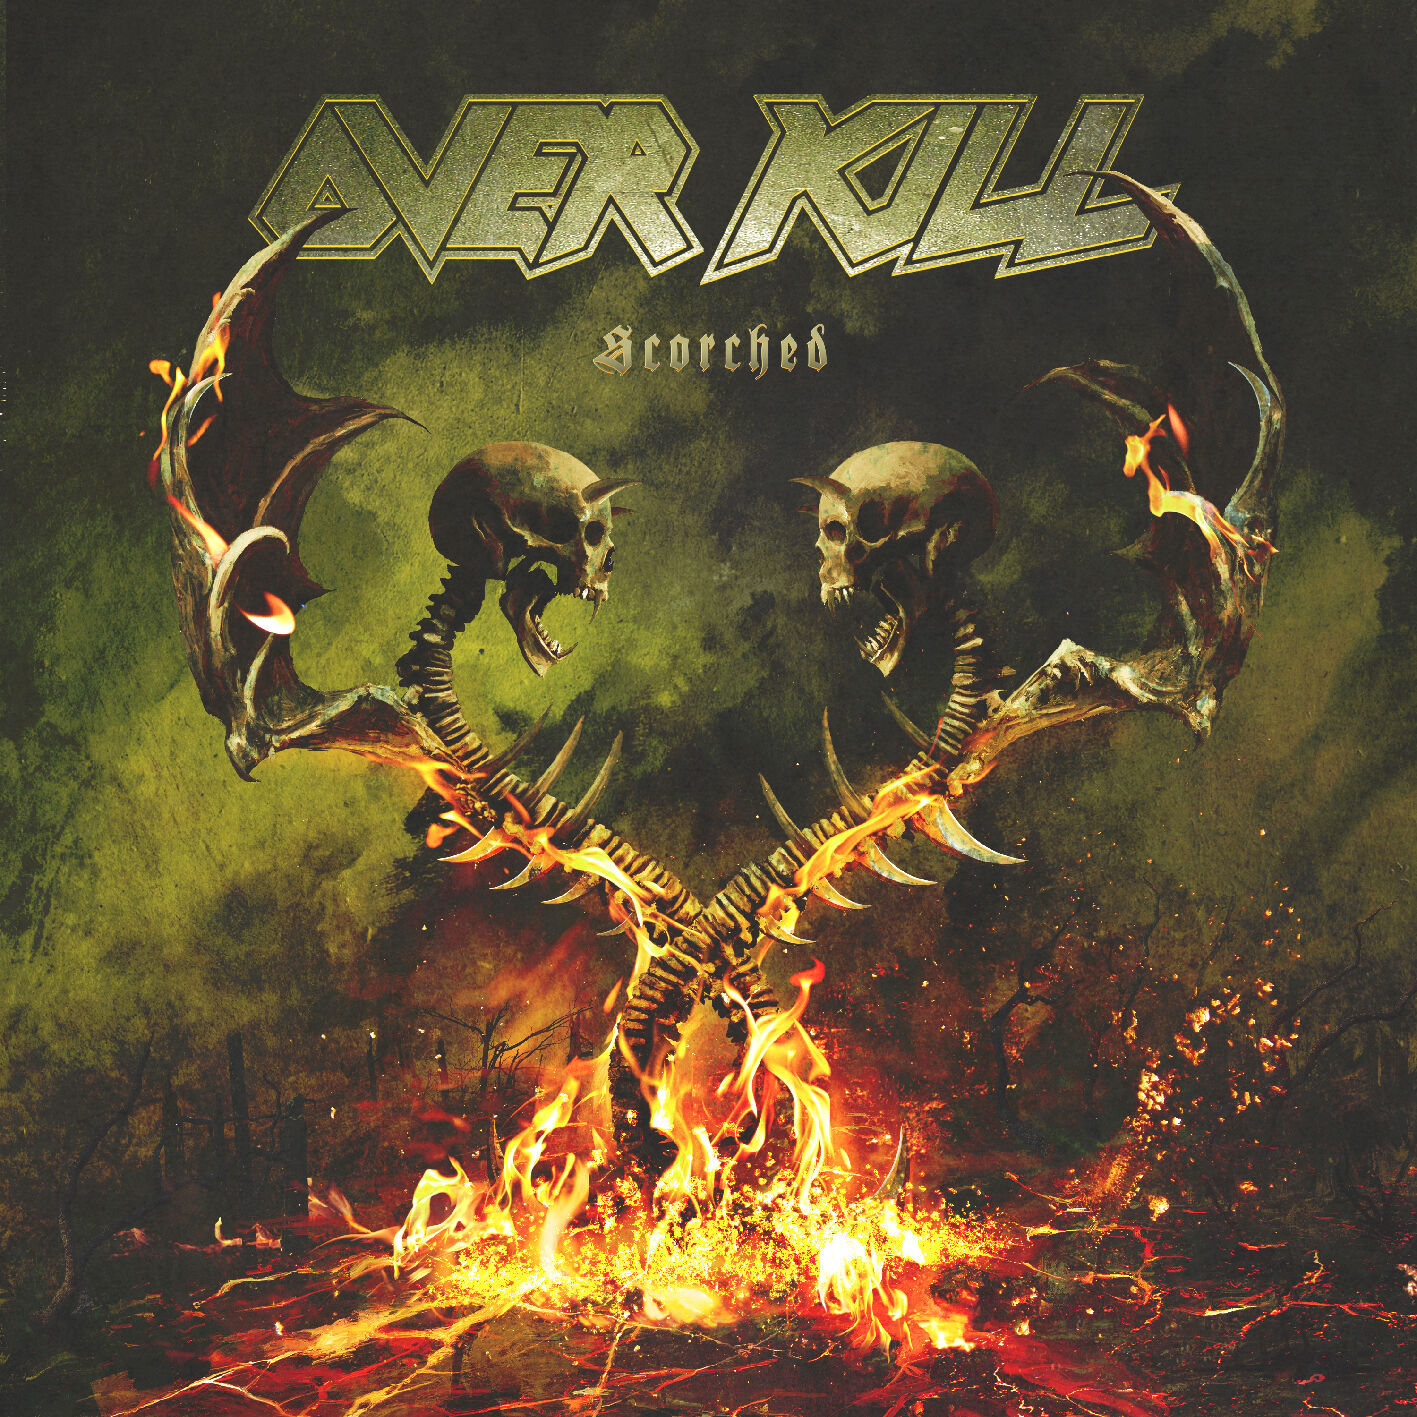 OVERKILL - Scorched [AZTEC GOLD DLP]